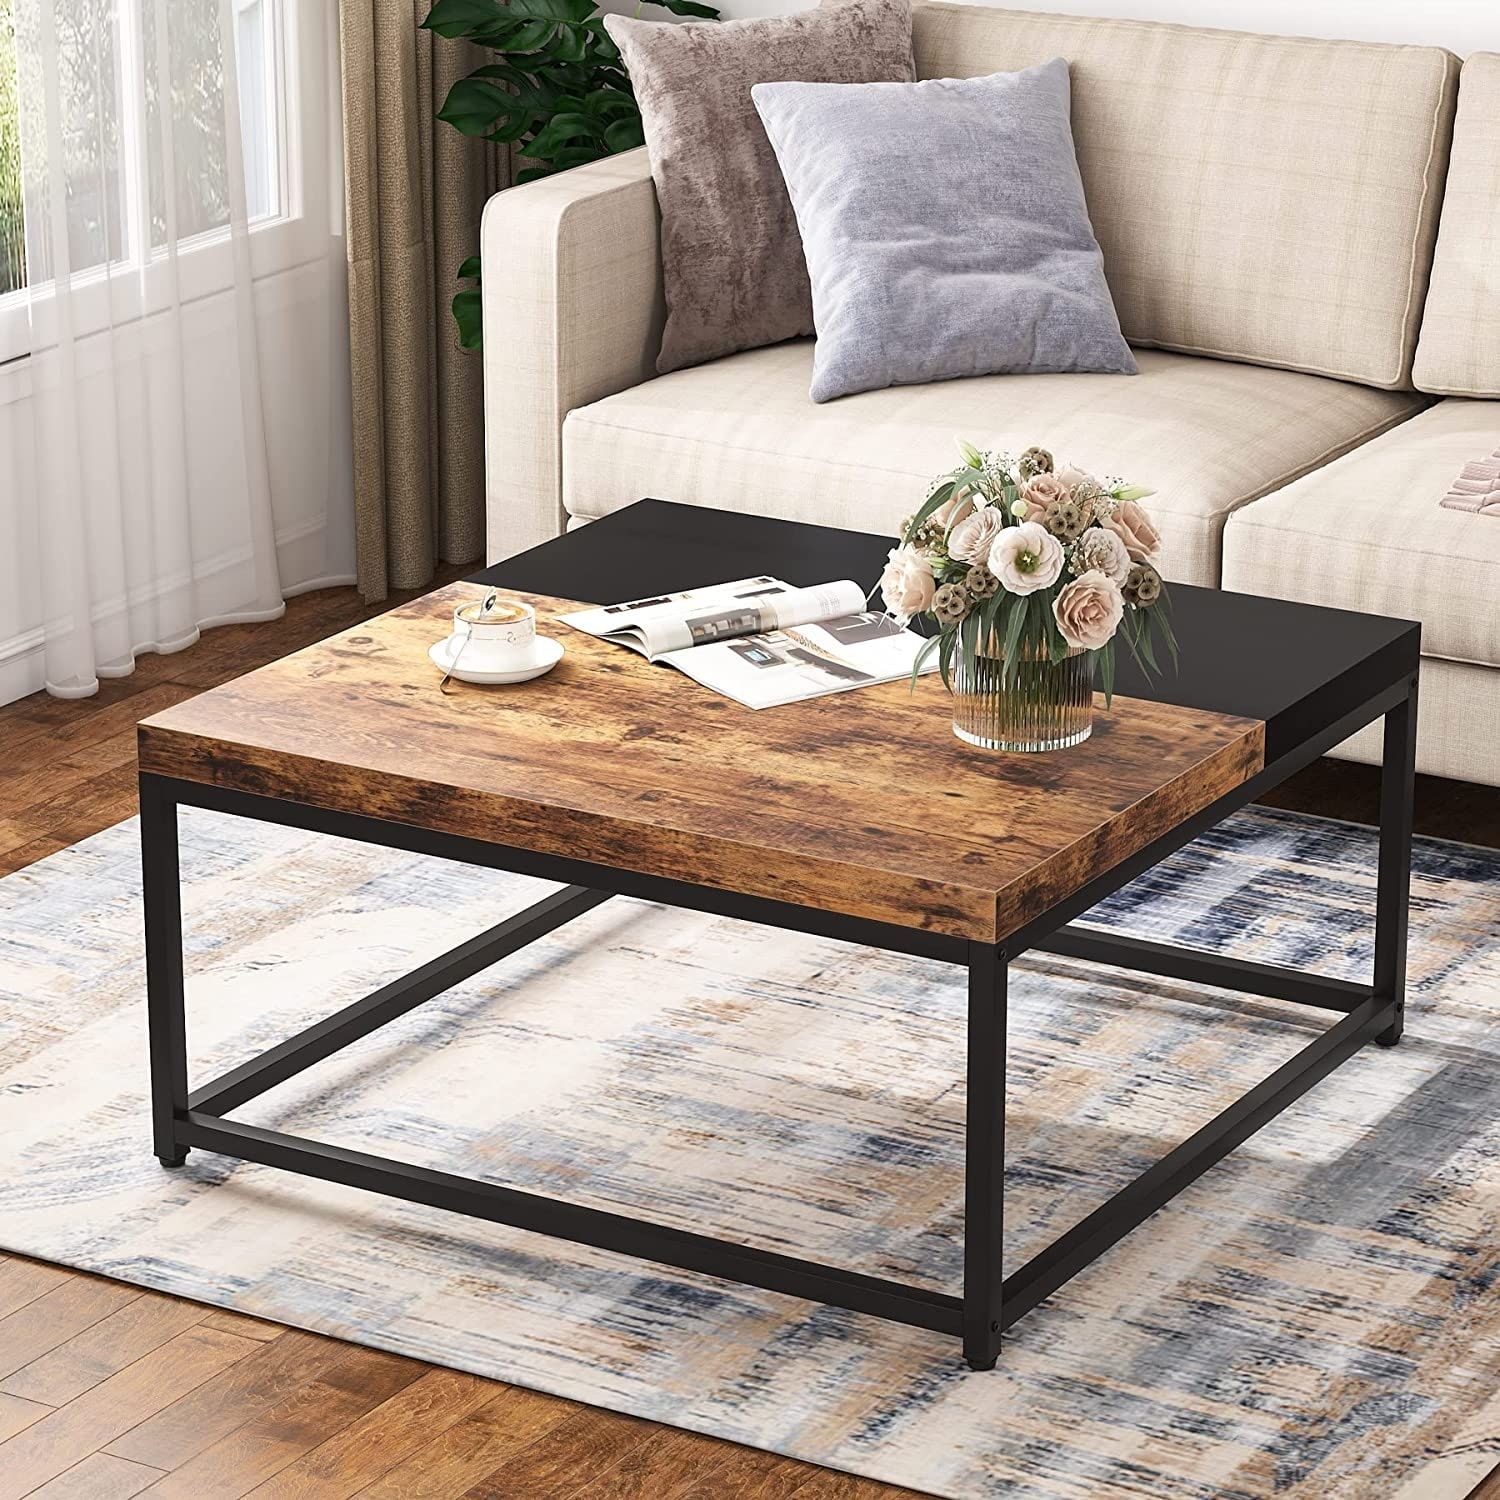 Large Coffee Table, Square Cocktail Table For Living Room Rustic Brown –  40"w Undefined 40"d Undefined 20"h – Bed Bath & Beyond – 35348388 Throughout Transitional Square Coffee Tables (View 10 of 15)